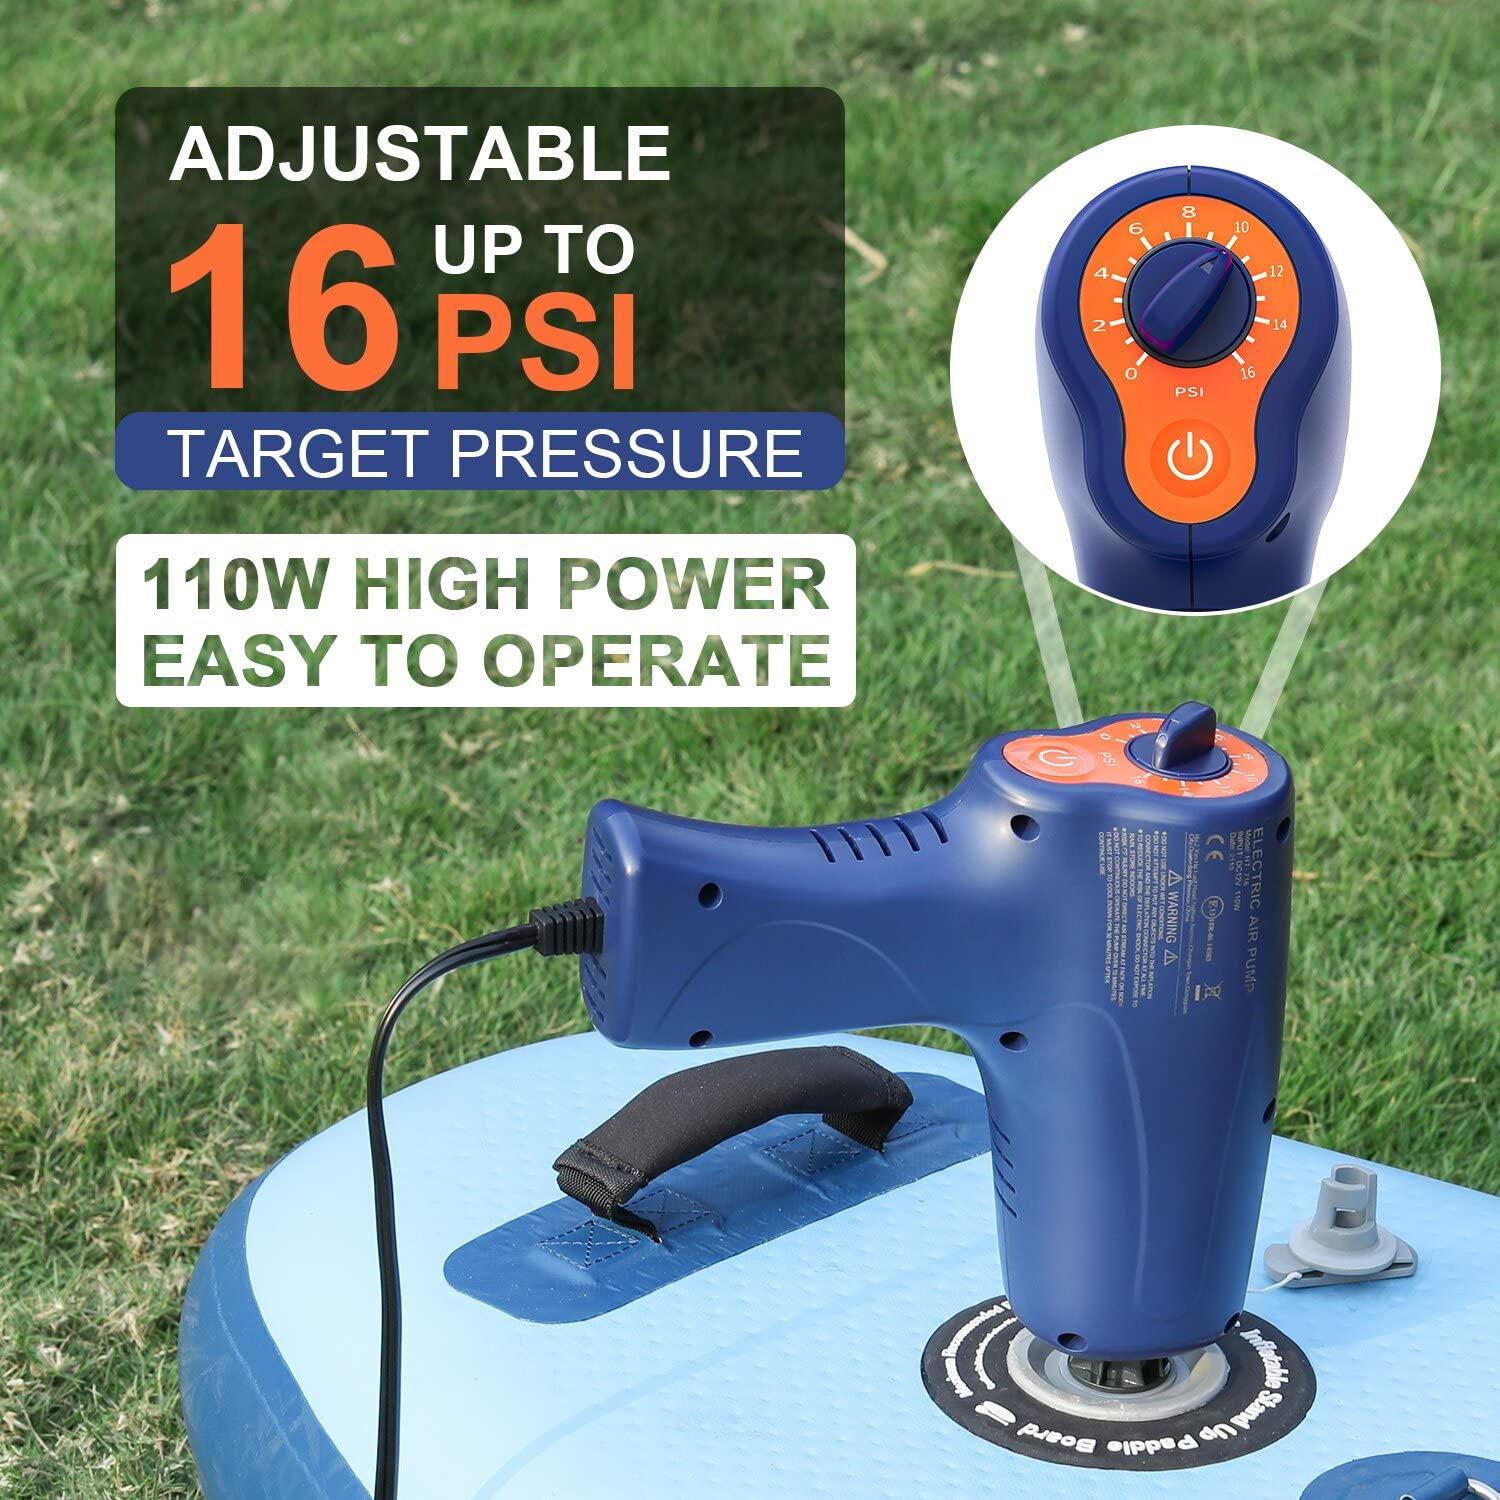 SUP Electric Air Pump, BEWELLAERO Hoseless Paddle Board Pump with 12V DC Car Connector,16 PSI Digital SUP inflator Pump with Auto-Off Function for Inflatable Stand-Up Paddle Boards 1